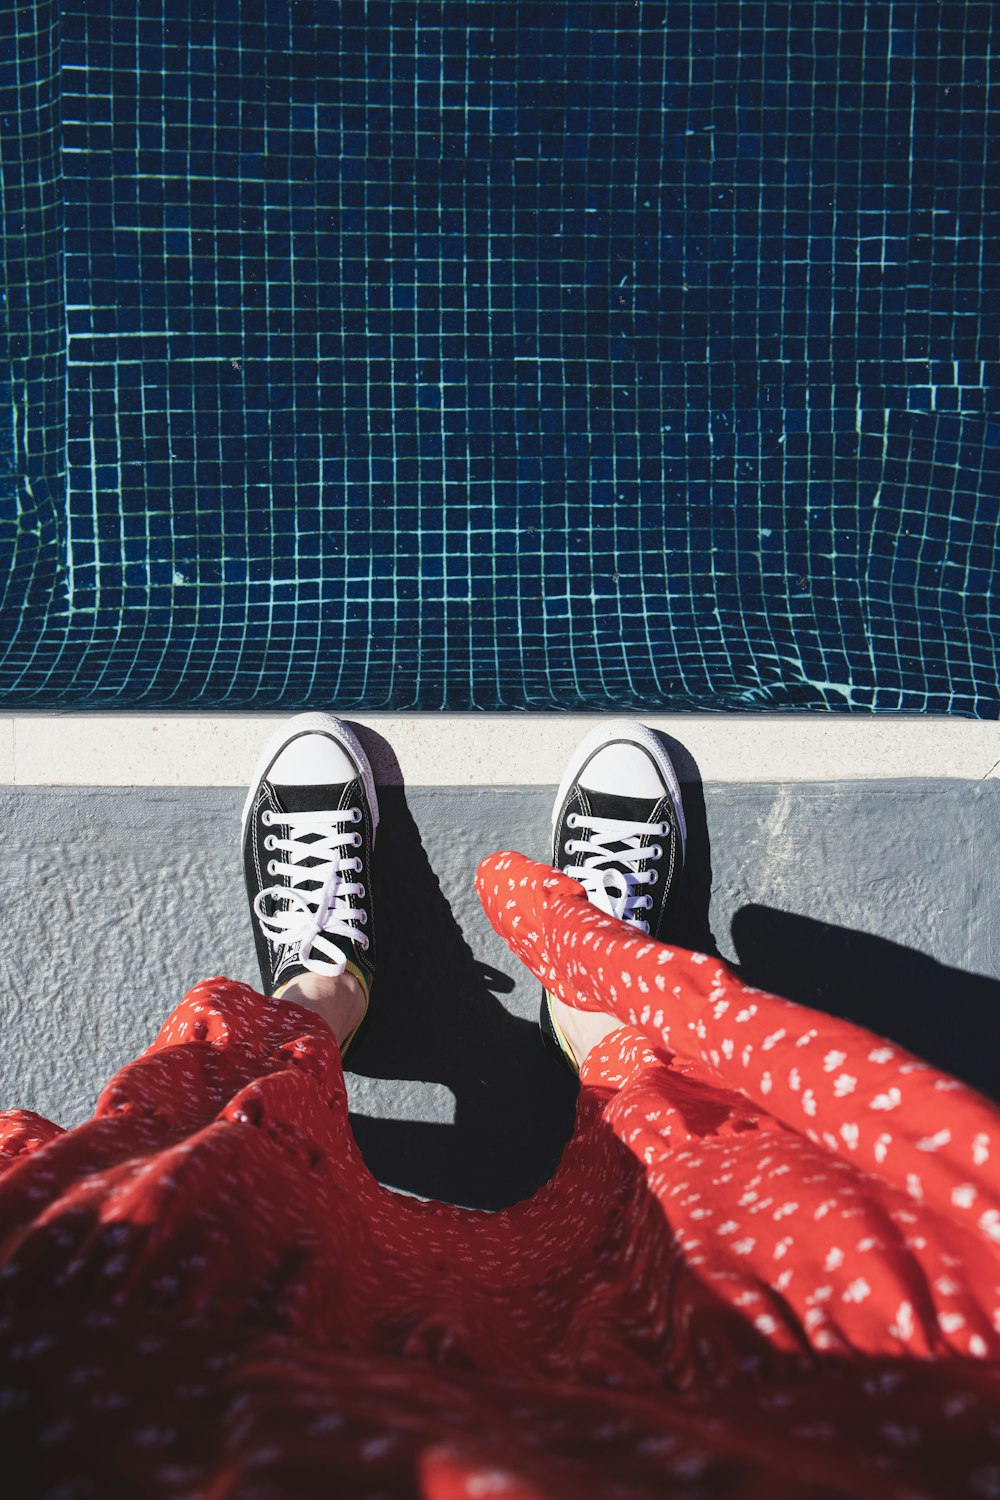 a person with their feet on a blanket near a swimming pool